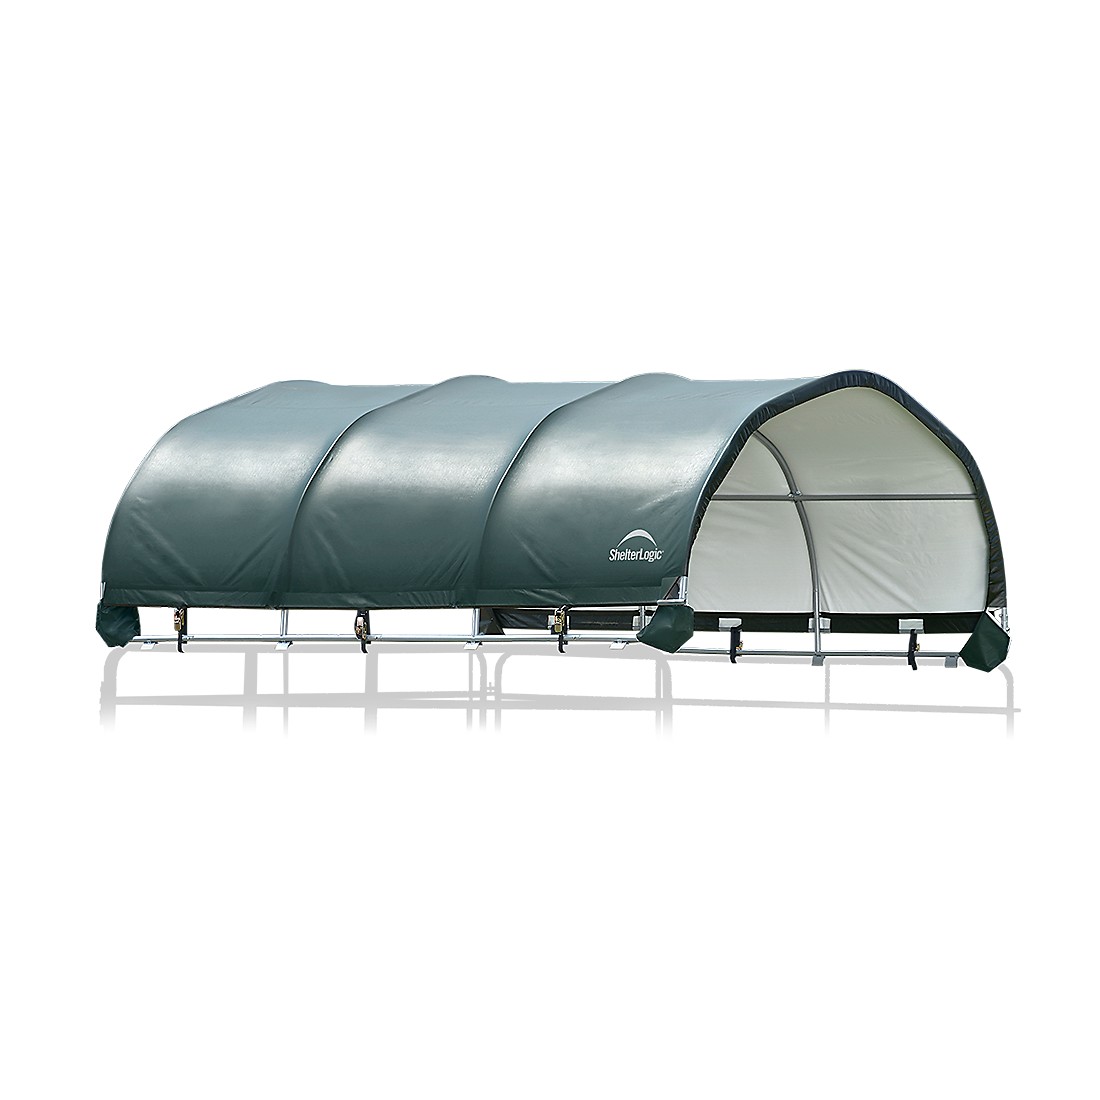 51512 12 X 12 Ft. Corral Shelter - Powder Coated 1 X 0.625 In. Steel Frame, 9 Oz - Green